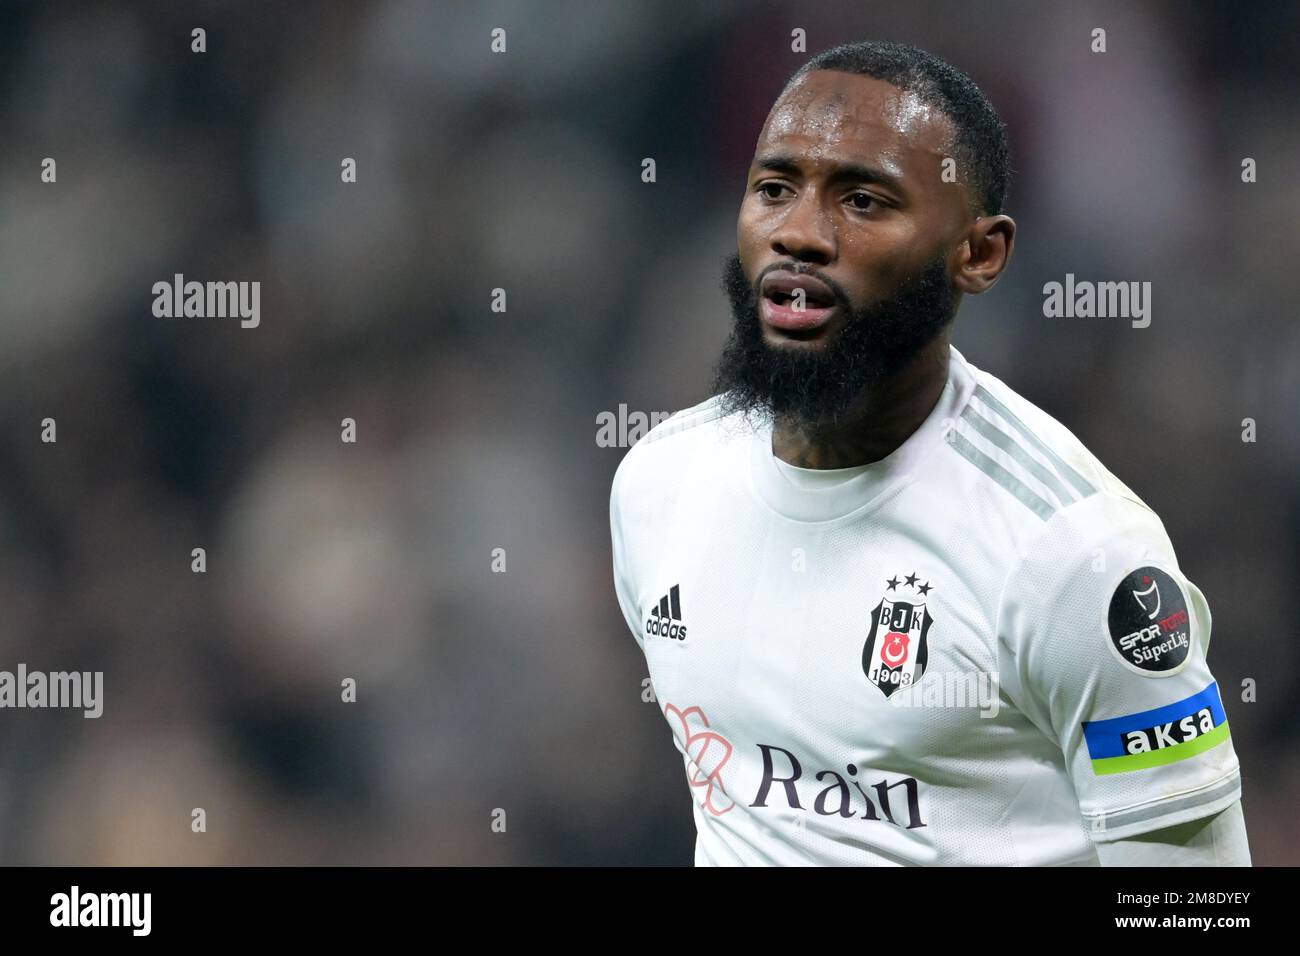 ISTANBUL - Georges Kevin NKoudou of Besiktas JK during the Turkish Super  Lig match between Besiktas AS and Kasimpasa AS at Vodafone Park on January  7, 2023 in Istanbul, Turkey. AP